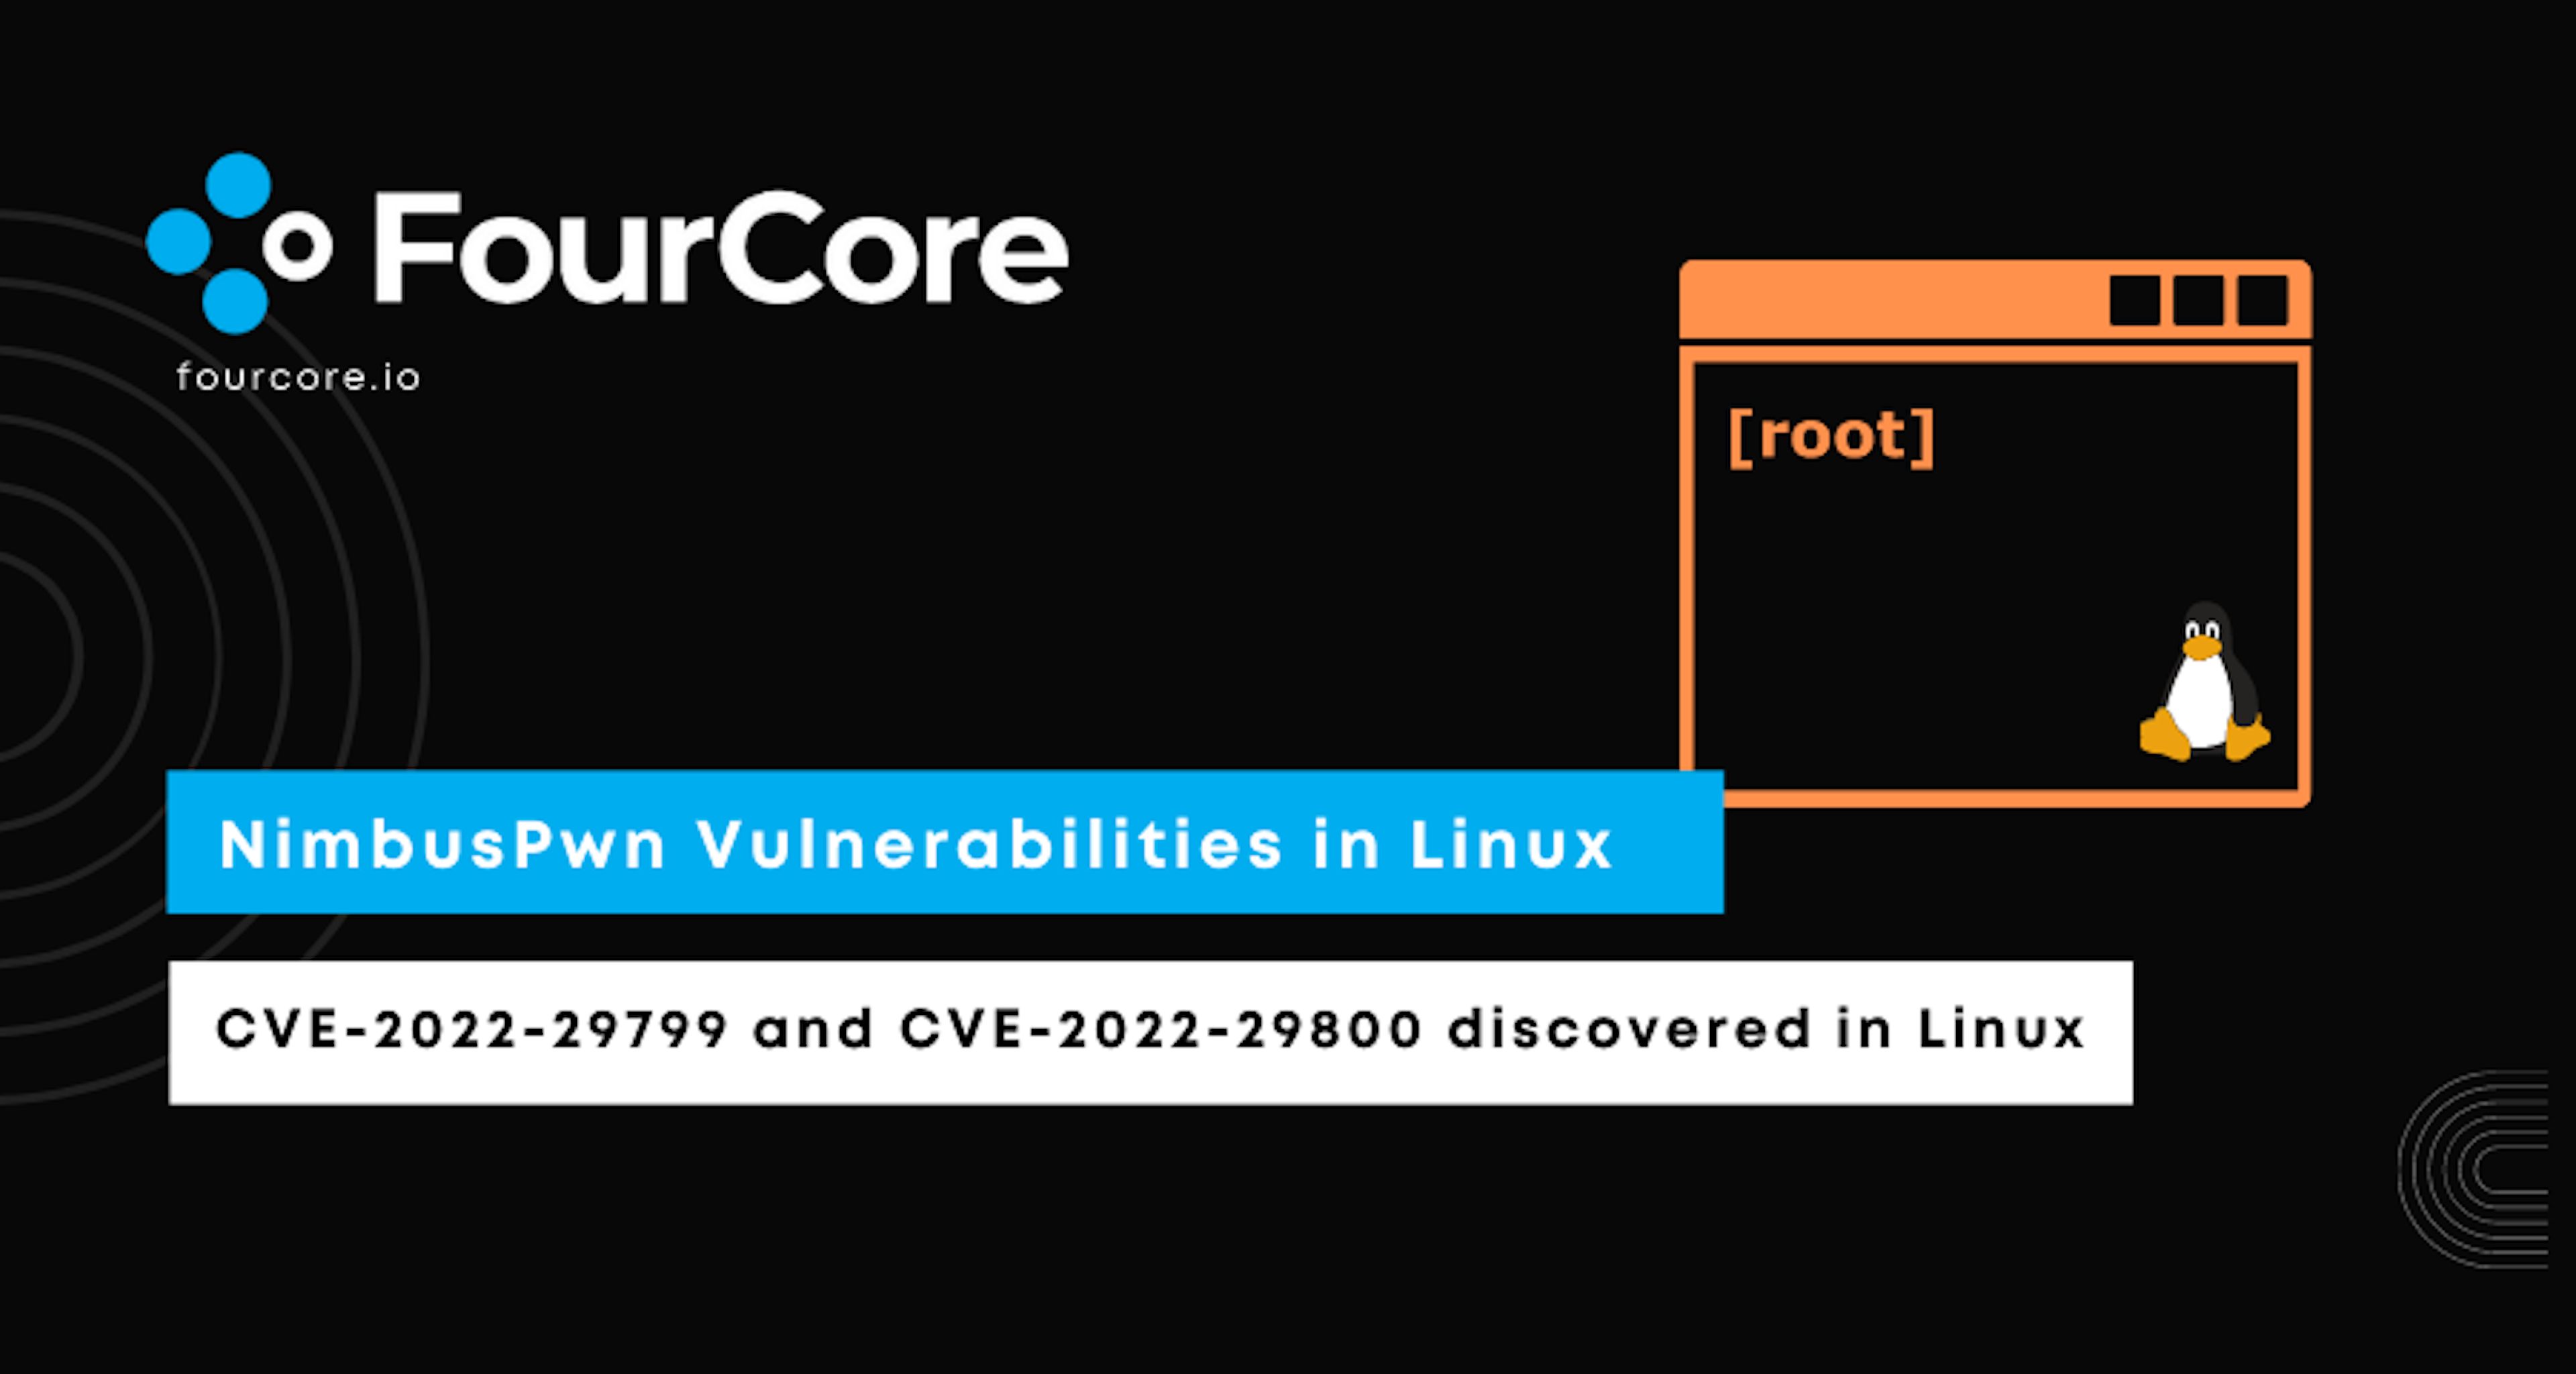 Privilege escalation vulnerabilities discovered in Linux known as Nimbuspwn Blog Post Image